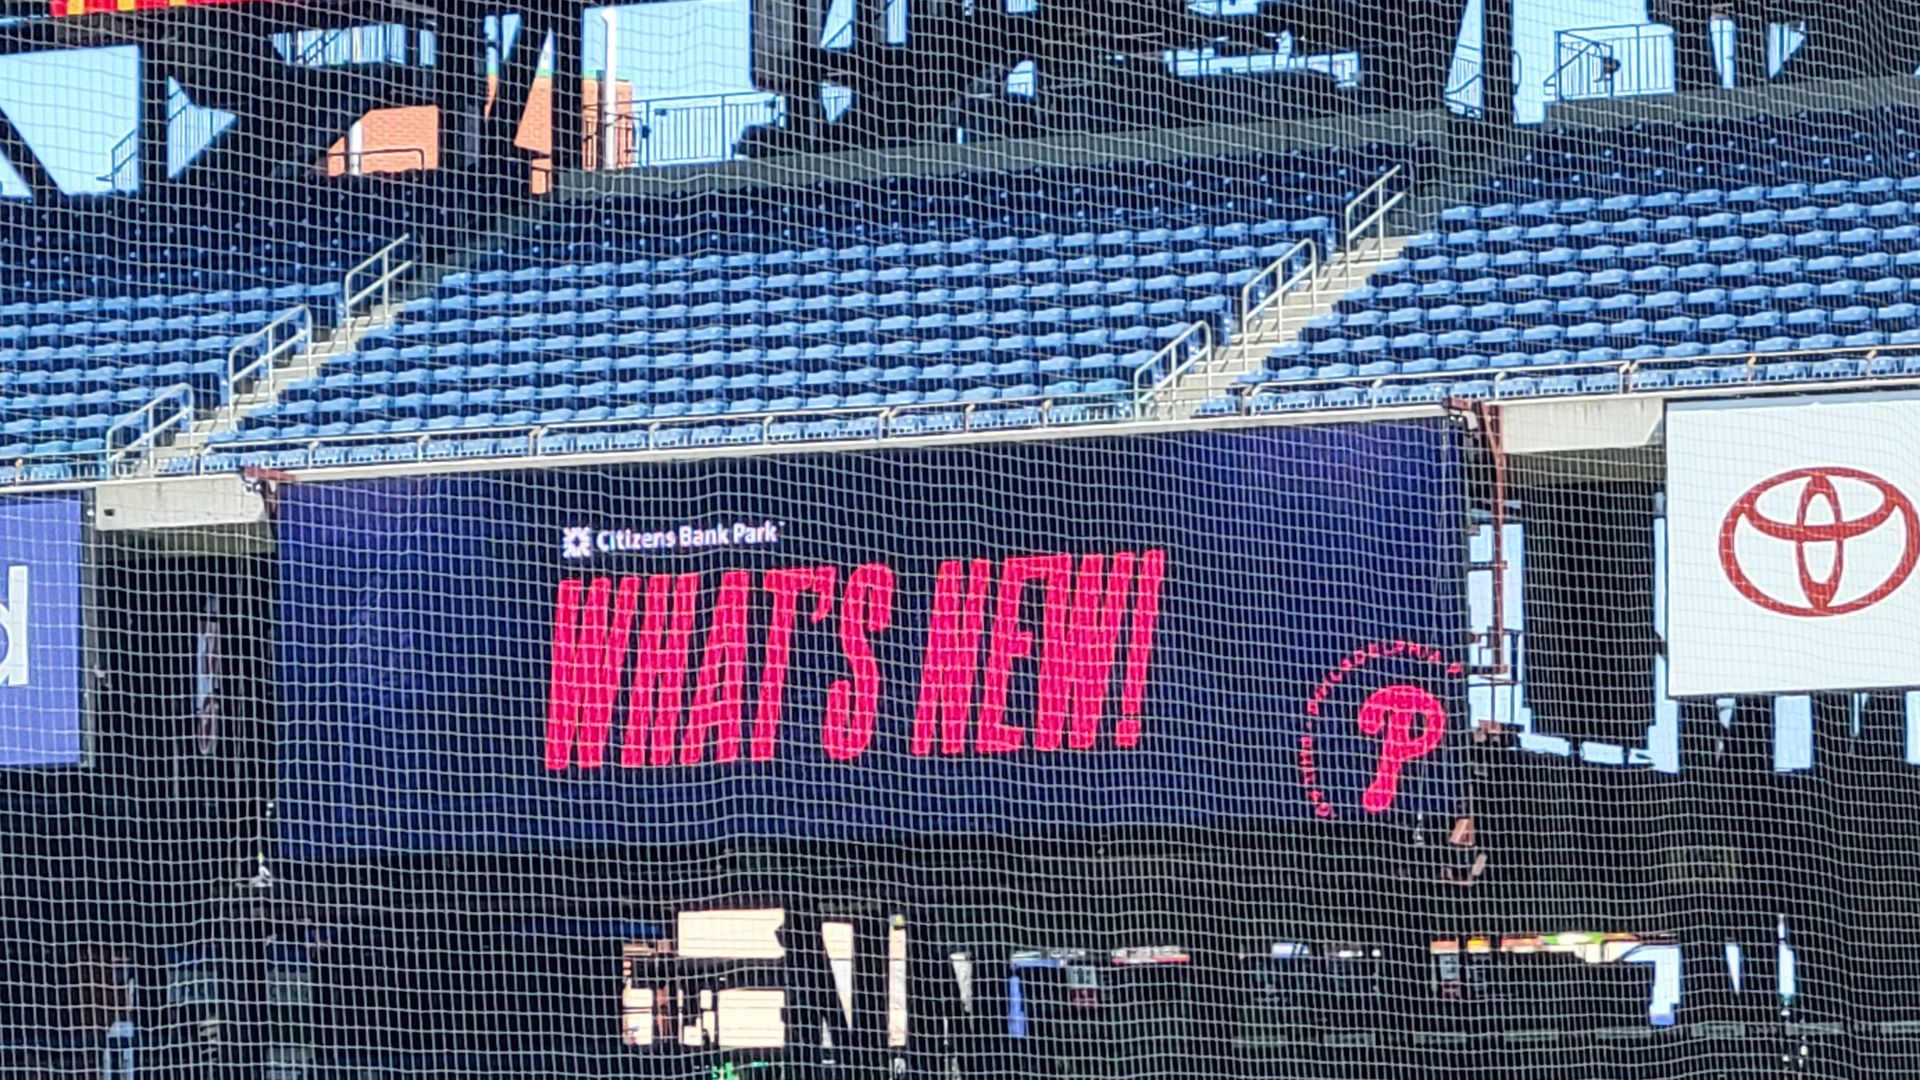 A "What's new" display on a video board at Citizens Bank Park.